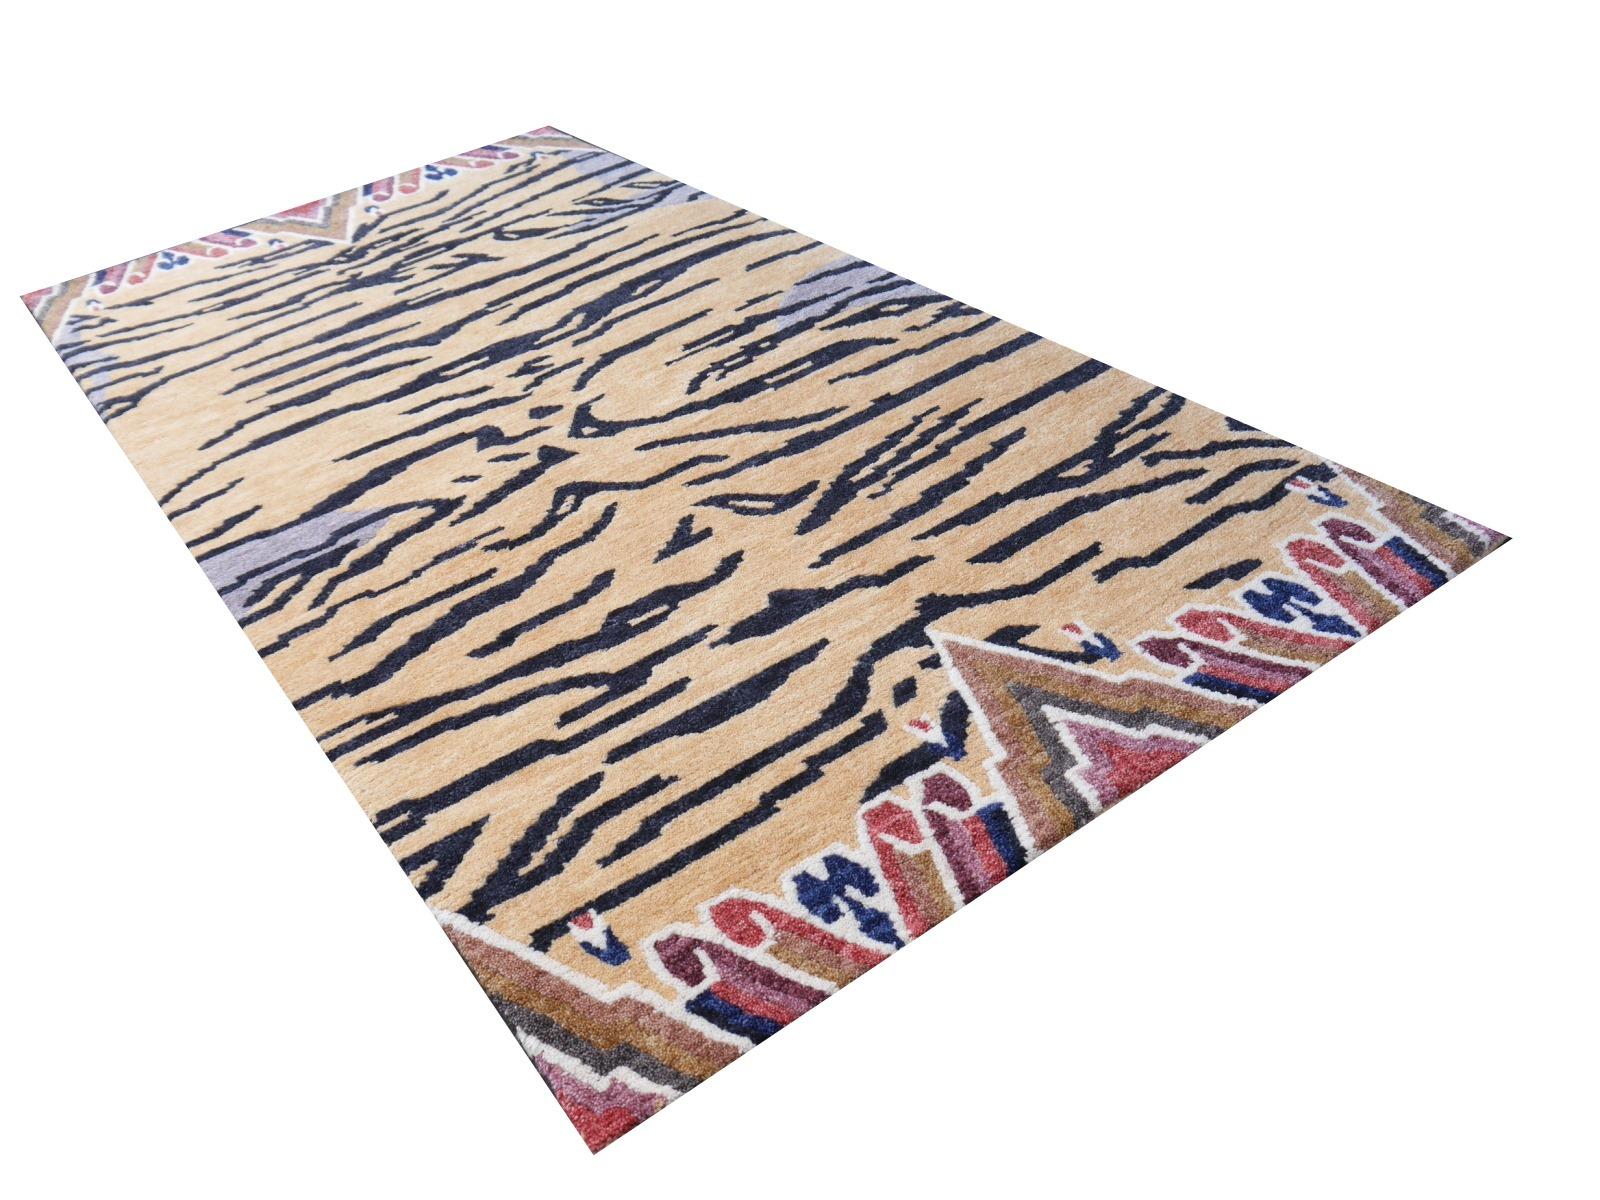 Tibetan Tiger Rug Pure Wool Hand Knotted by Djoharian Collection Antique Design 4